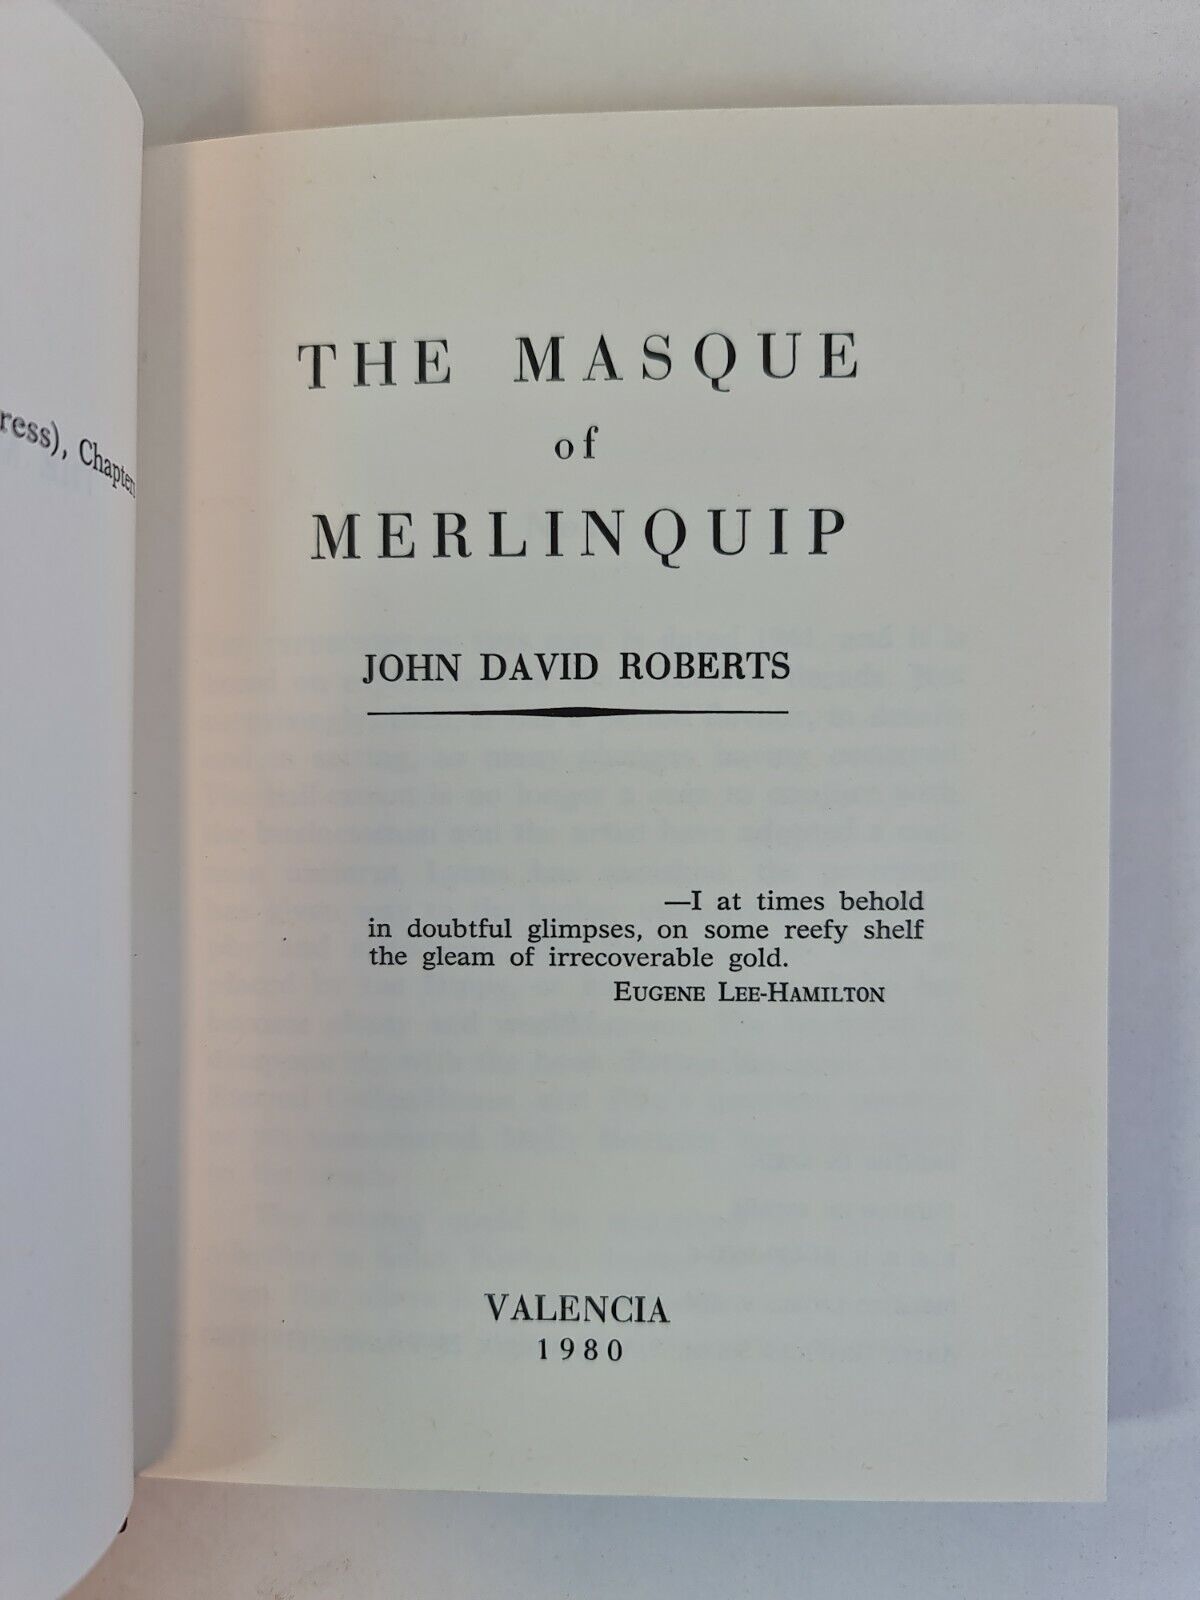 SIGNED The Masque Of Merlinquip by JD Roberts (1980) - 42/500 Copies